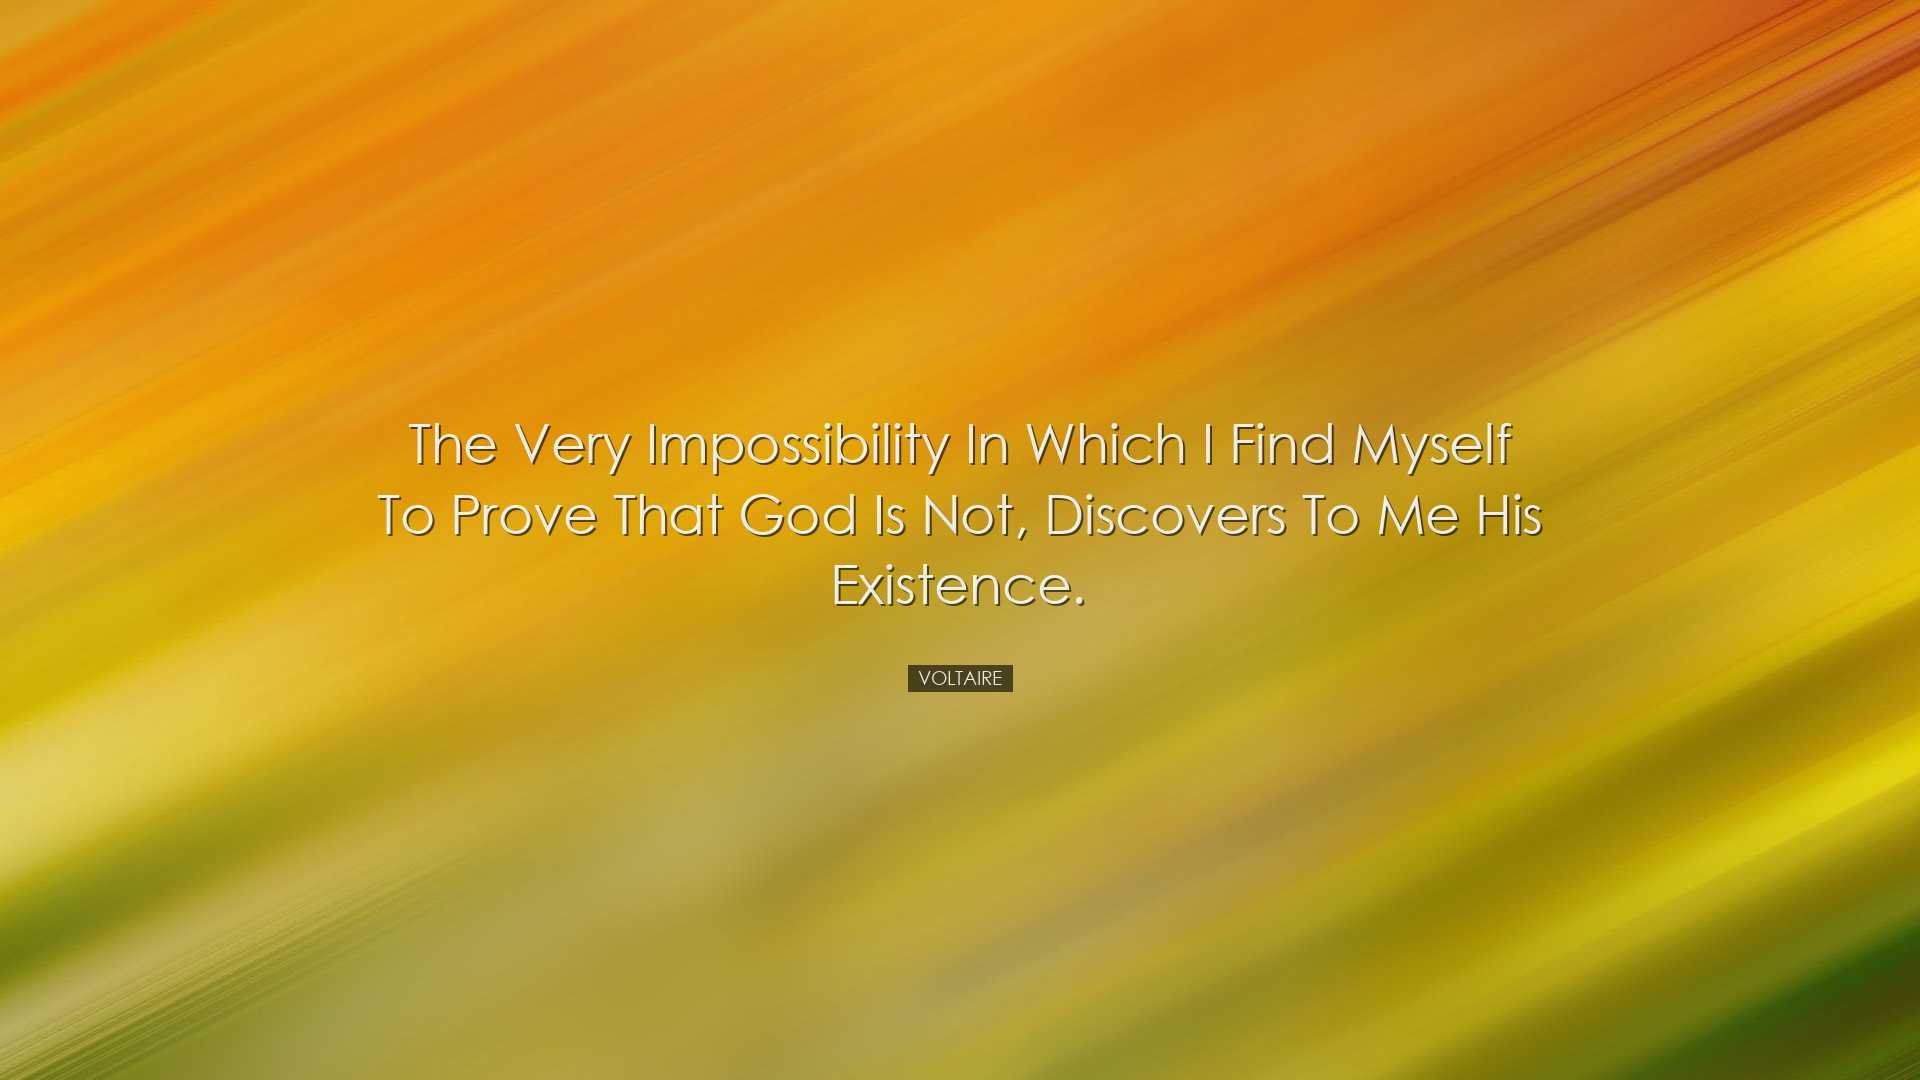 The very impossibility in which I find myself to prove that God is